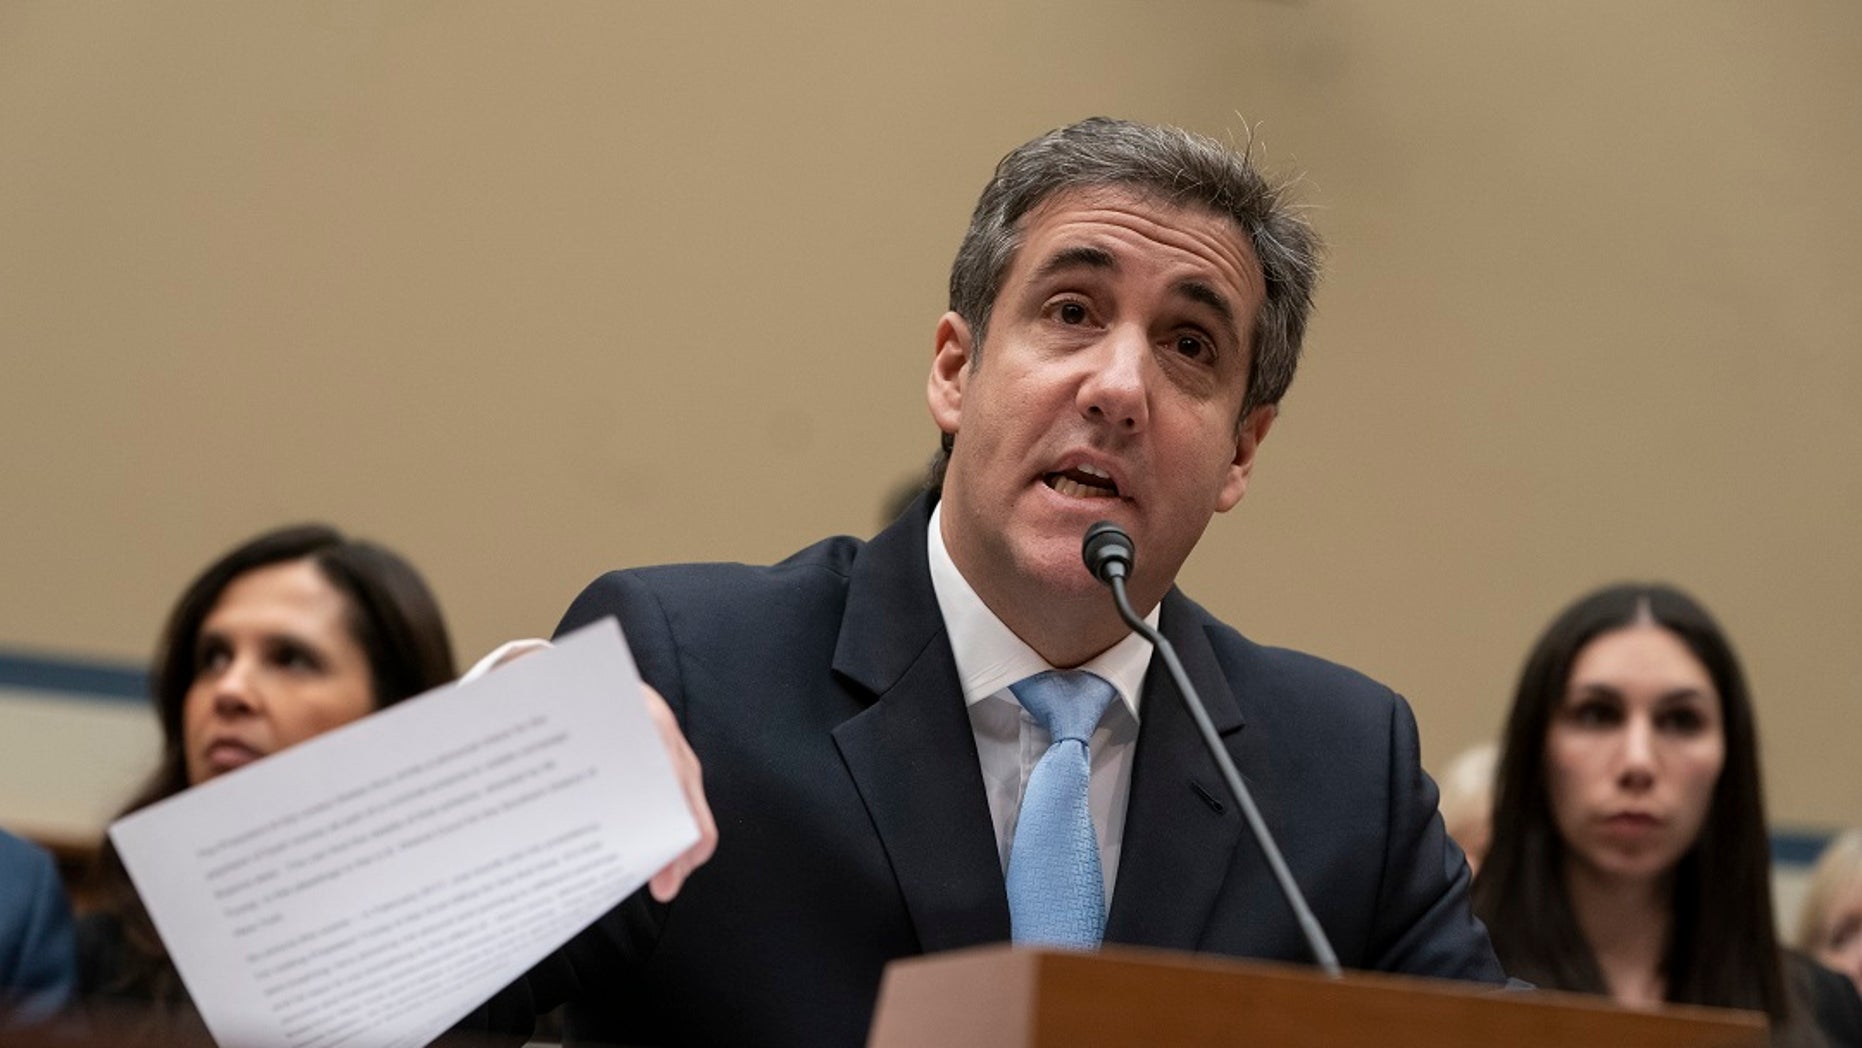 Michael Cohen, former personal advocate of President Donald Trump, reads an opening statement in his testimony before the House of Representatives 'Capitol Hill House of Representatives' Monitoring and Reform Committee in Washington. (Associated Press)